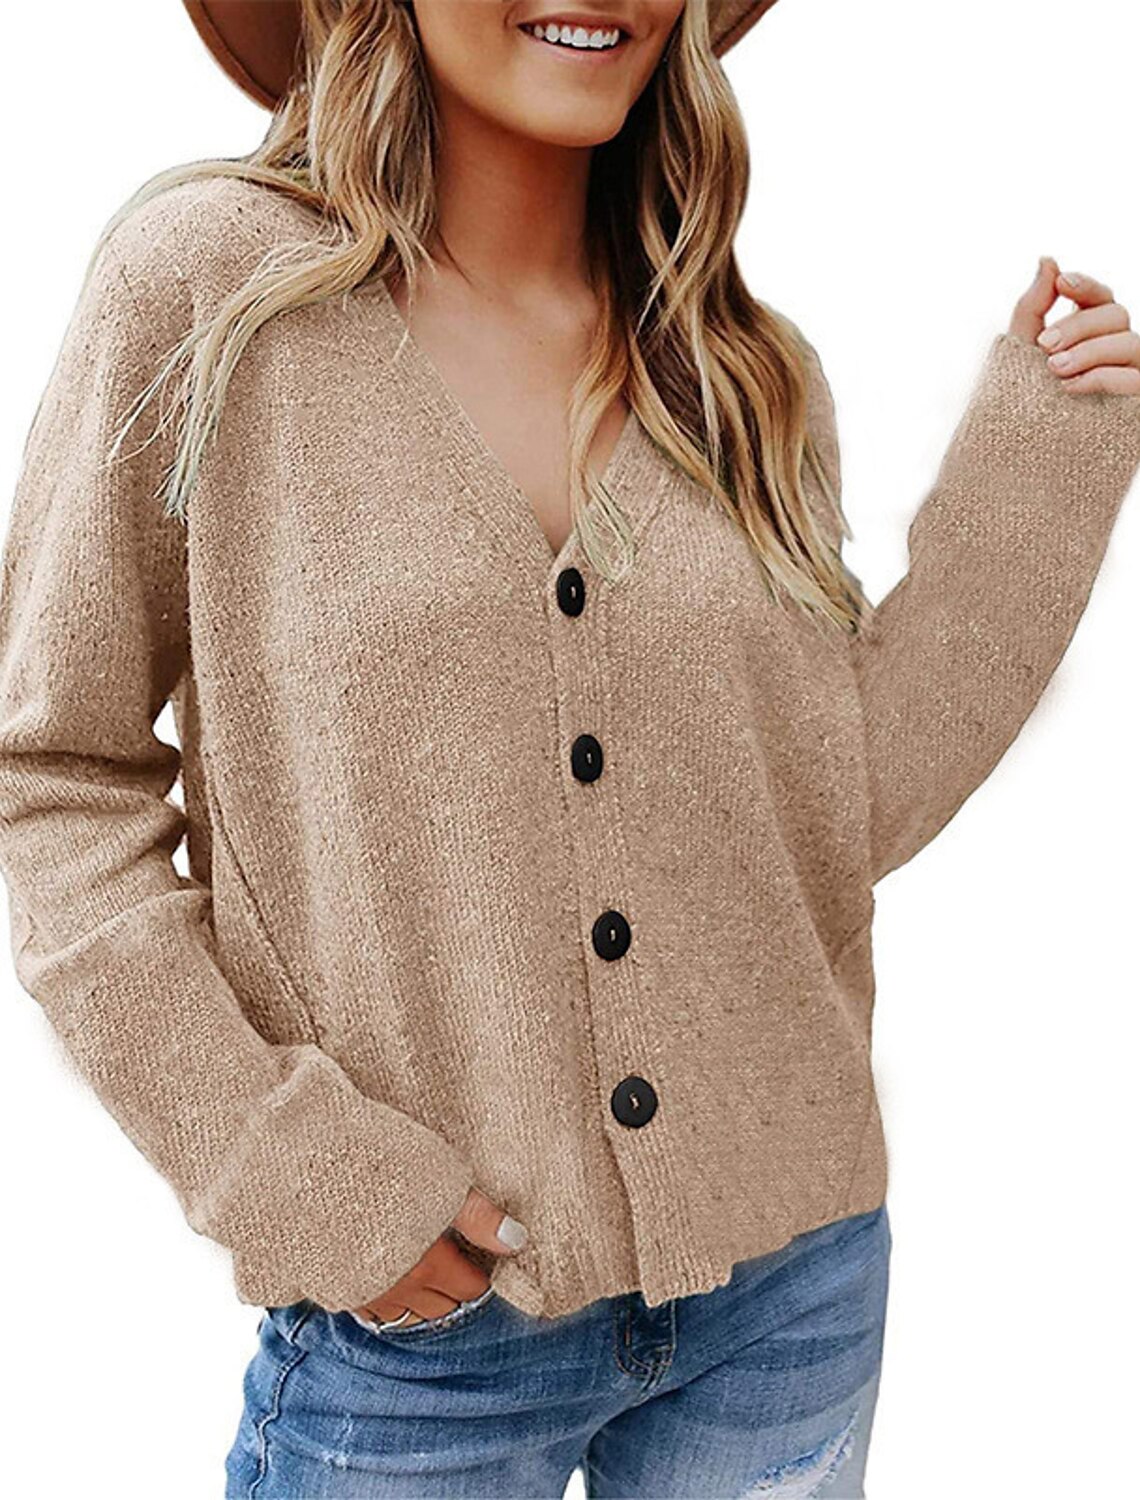 Women's Cardigan Sweater Jumper Cable Chunky Knit Knitted Button